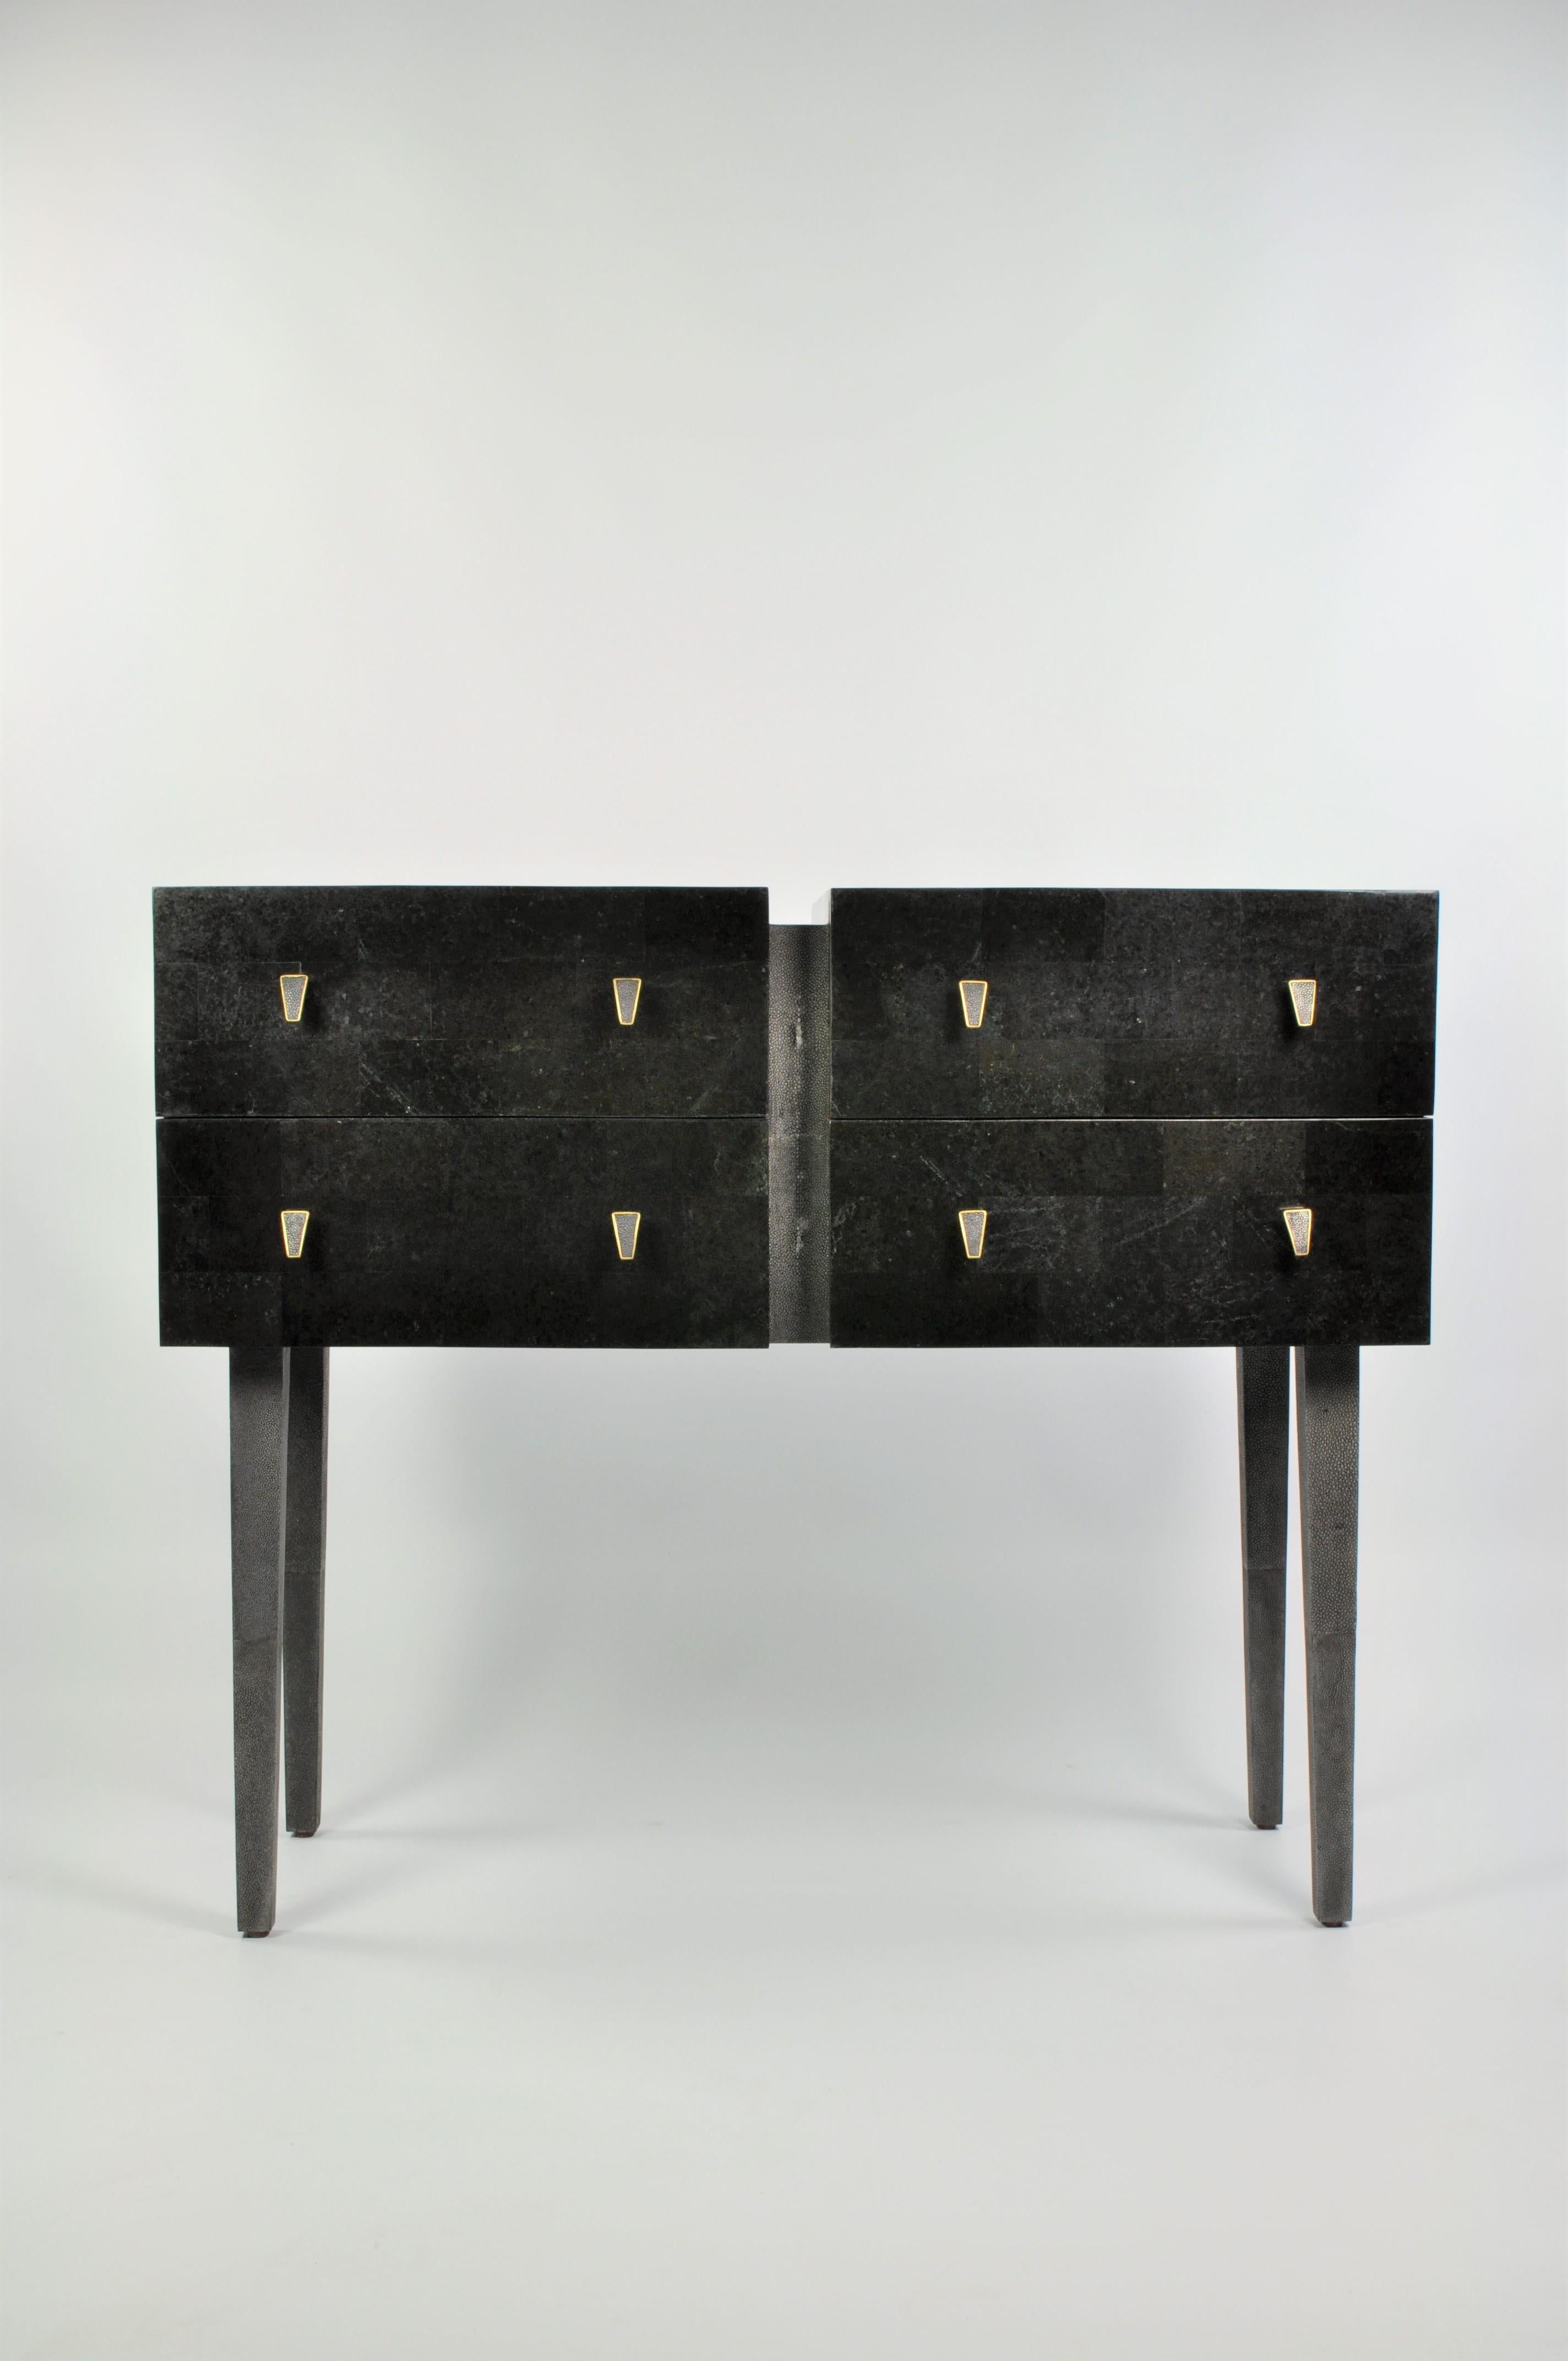 This chest of drawers is made of black stone marquetry with shagreen details on the top and the legs. It has four drawers.
The handles are made in lost wax cast brass with an antic brass patina and shagreen.
The interior of the drawers is in wenge